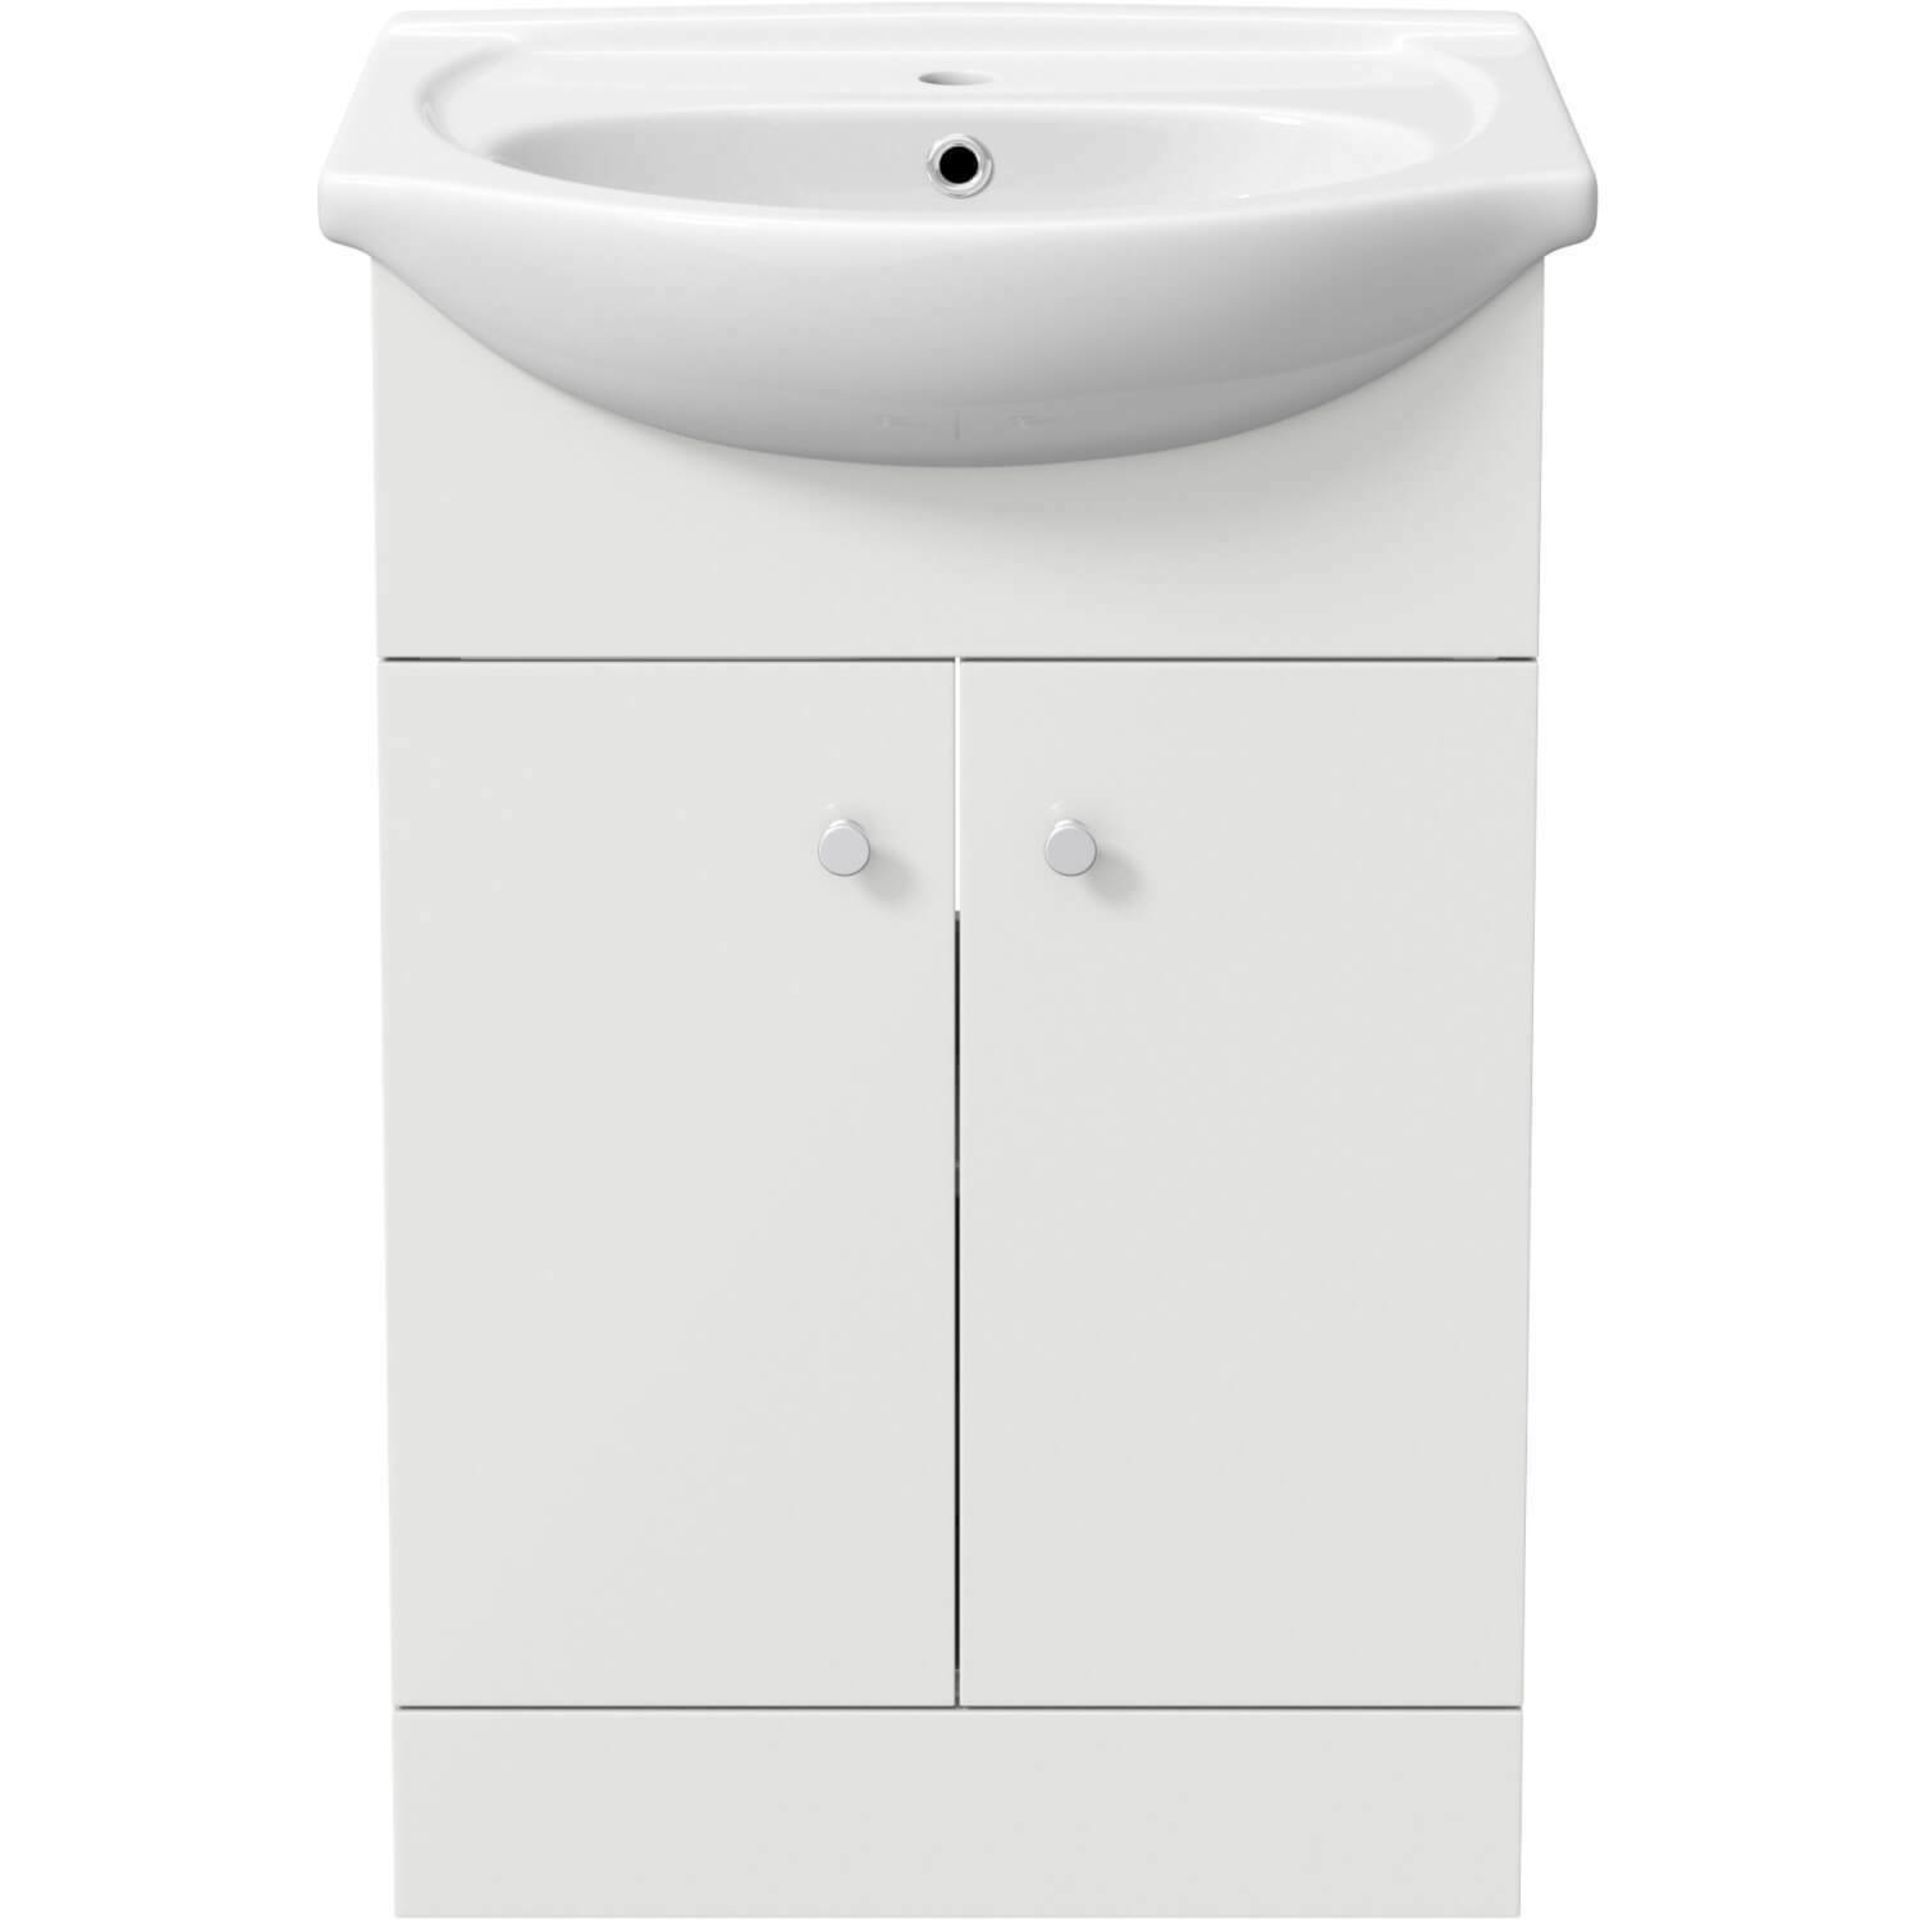 PALLET TO CONTAIN 8 X BRAND NEW BOXED 550mm Quartz Basin Sink Vanity Unit Floor Standing White. - Image 3 of 3